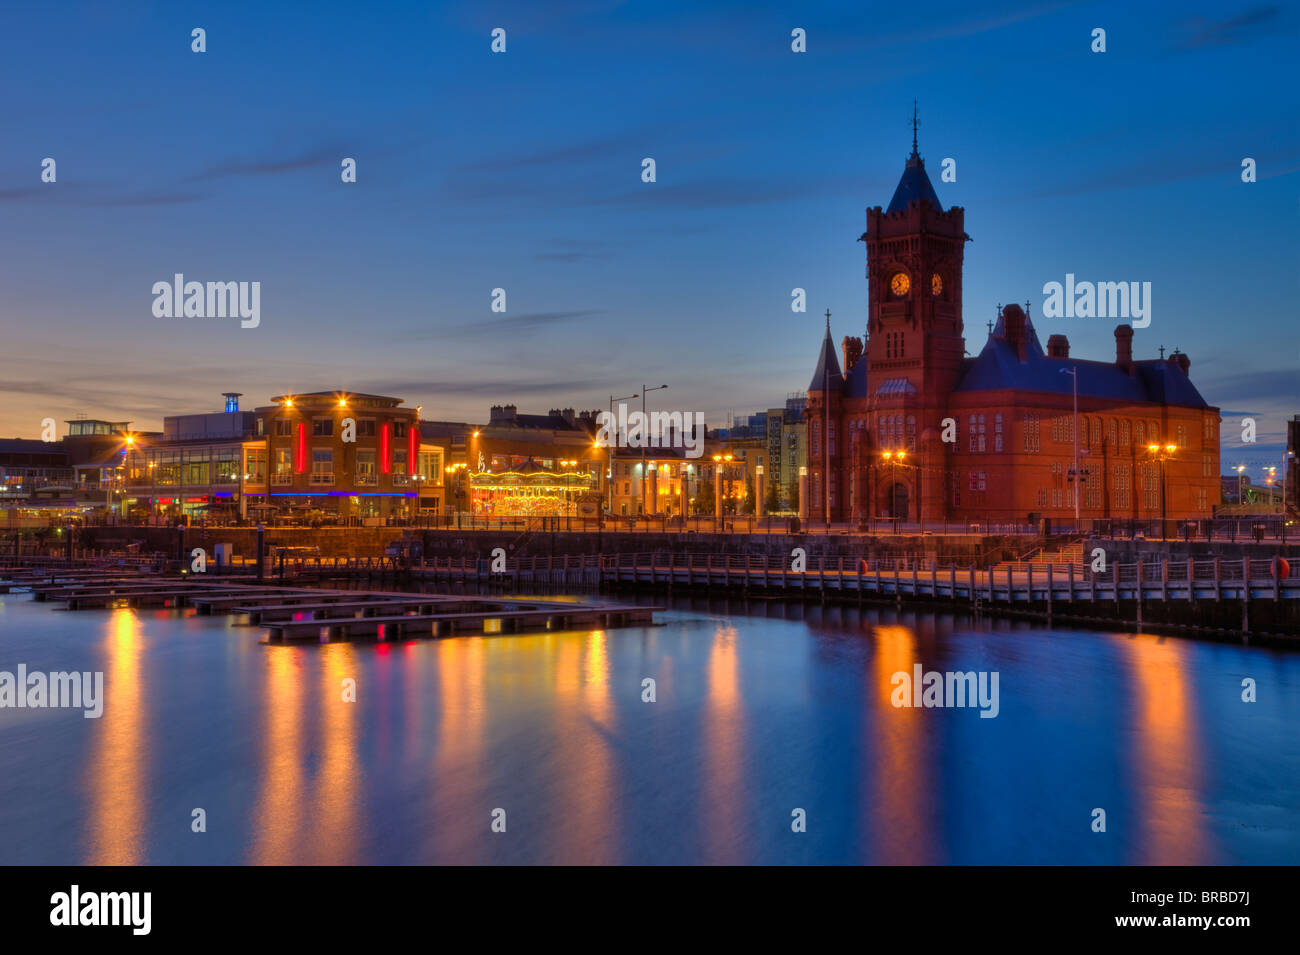 View across Mermaid Dock to Pierhead building and city skyline on waterfront at dusk - hdr. Cardiff Bay, Cardiff, Glamorgan, South Wales, UK. Stock Photo